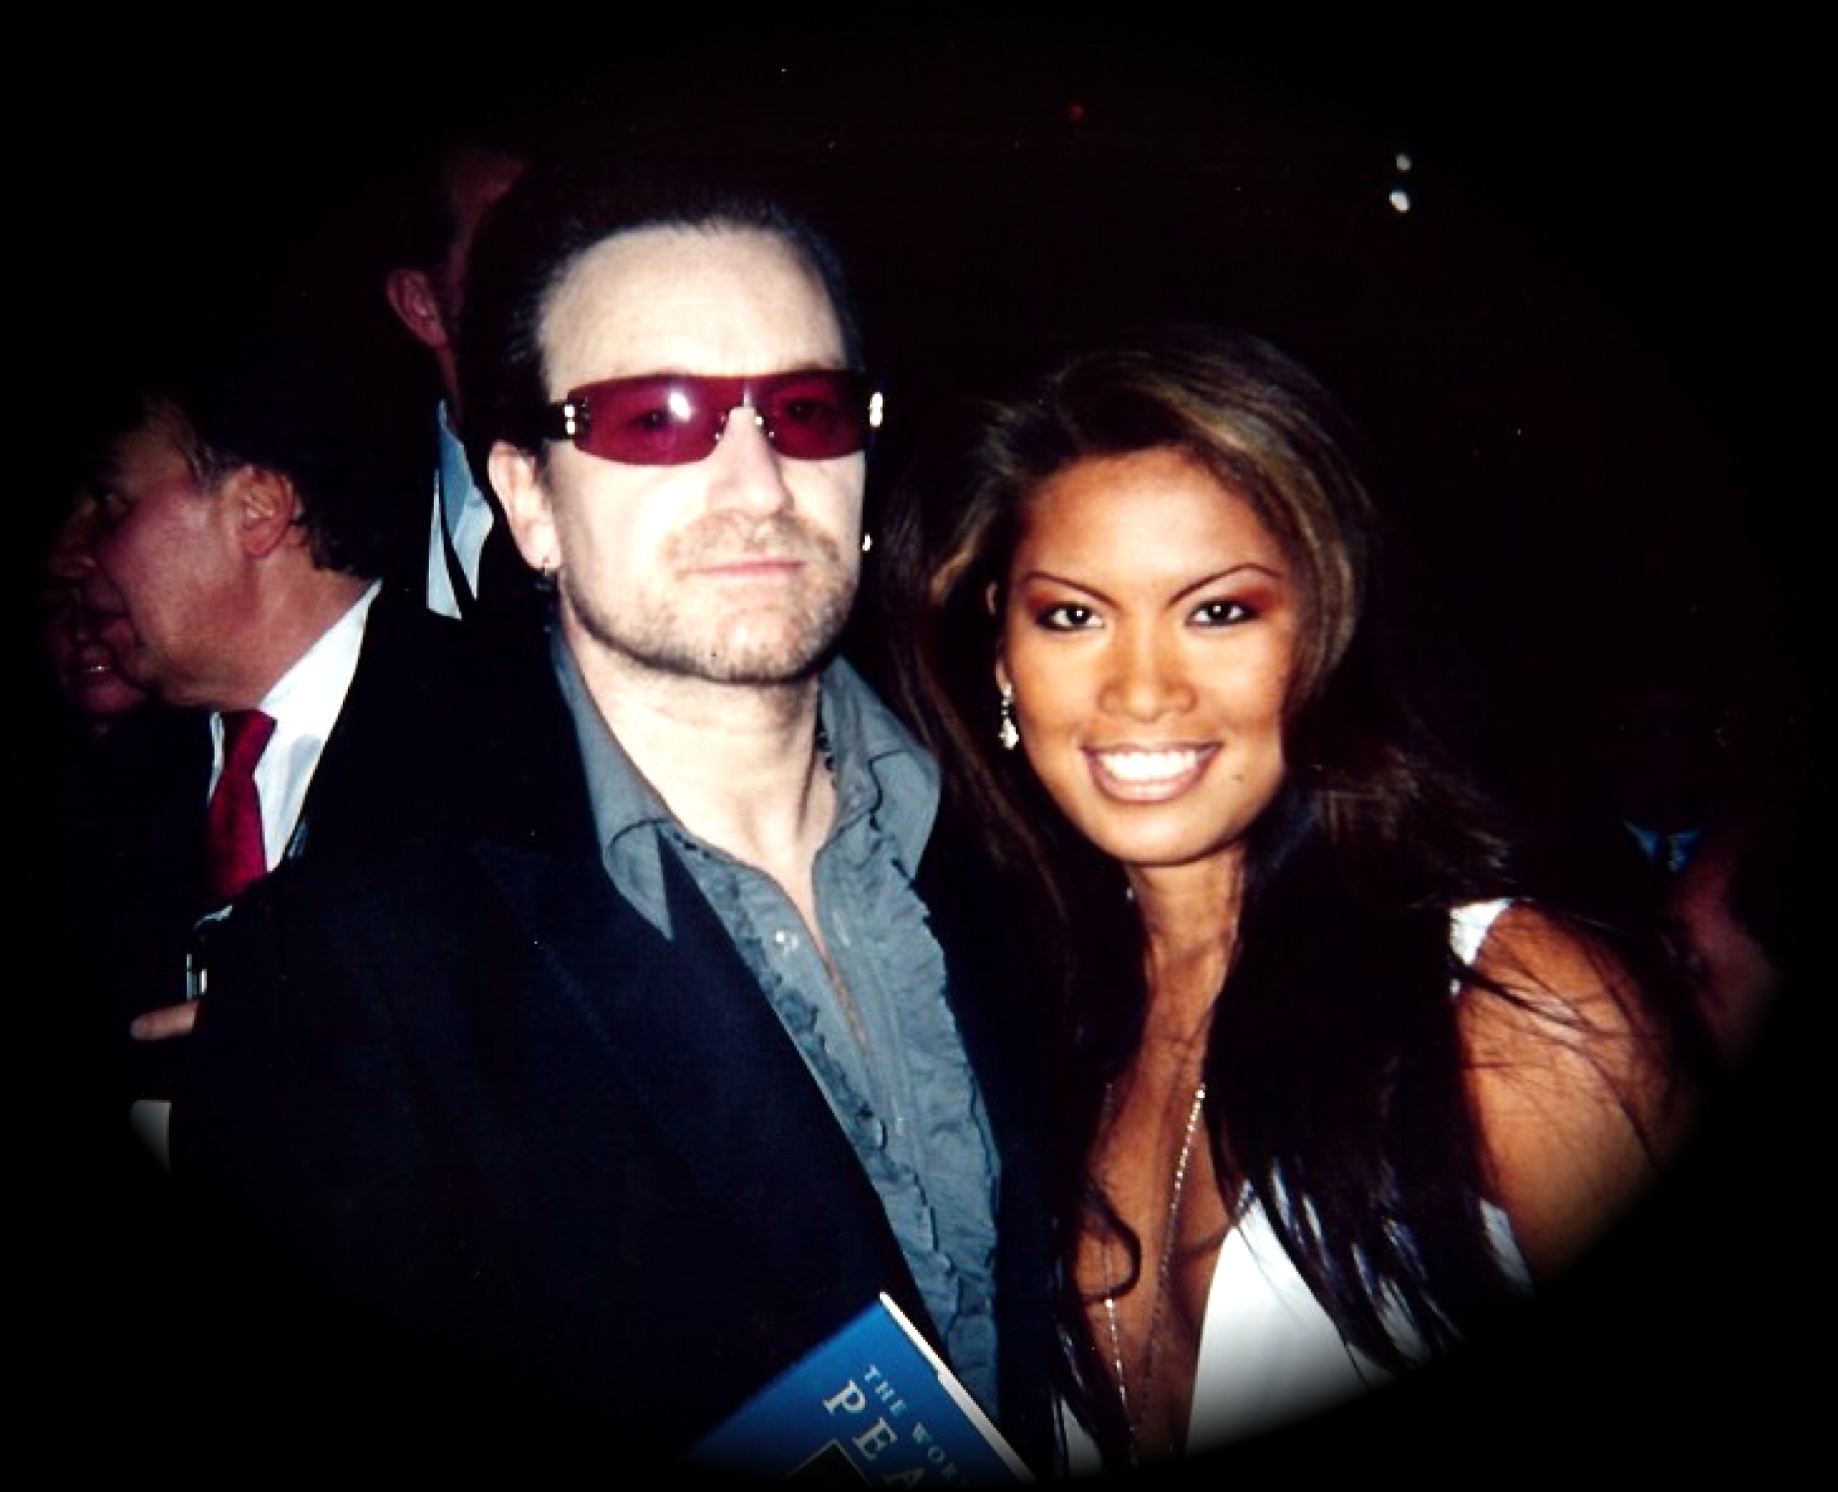 TV personality/Musician ZARAH presented Bono a 'Peace Book' from Dr. Michael Nobel (of Nobel family).